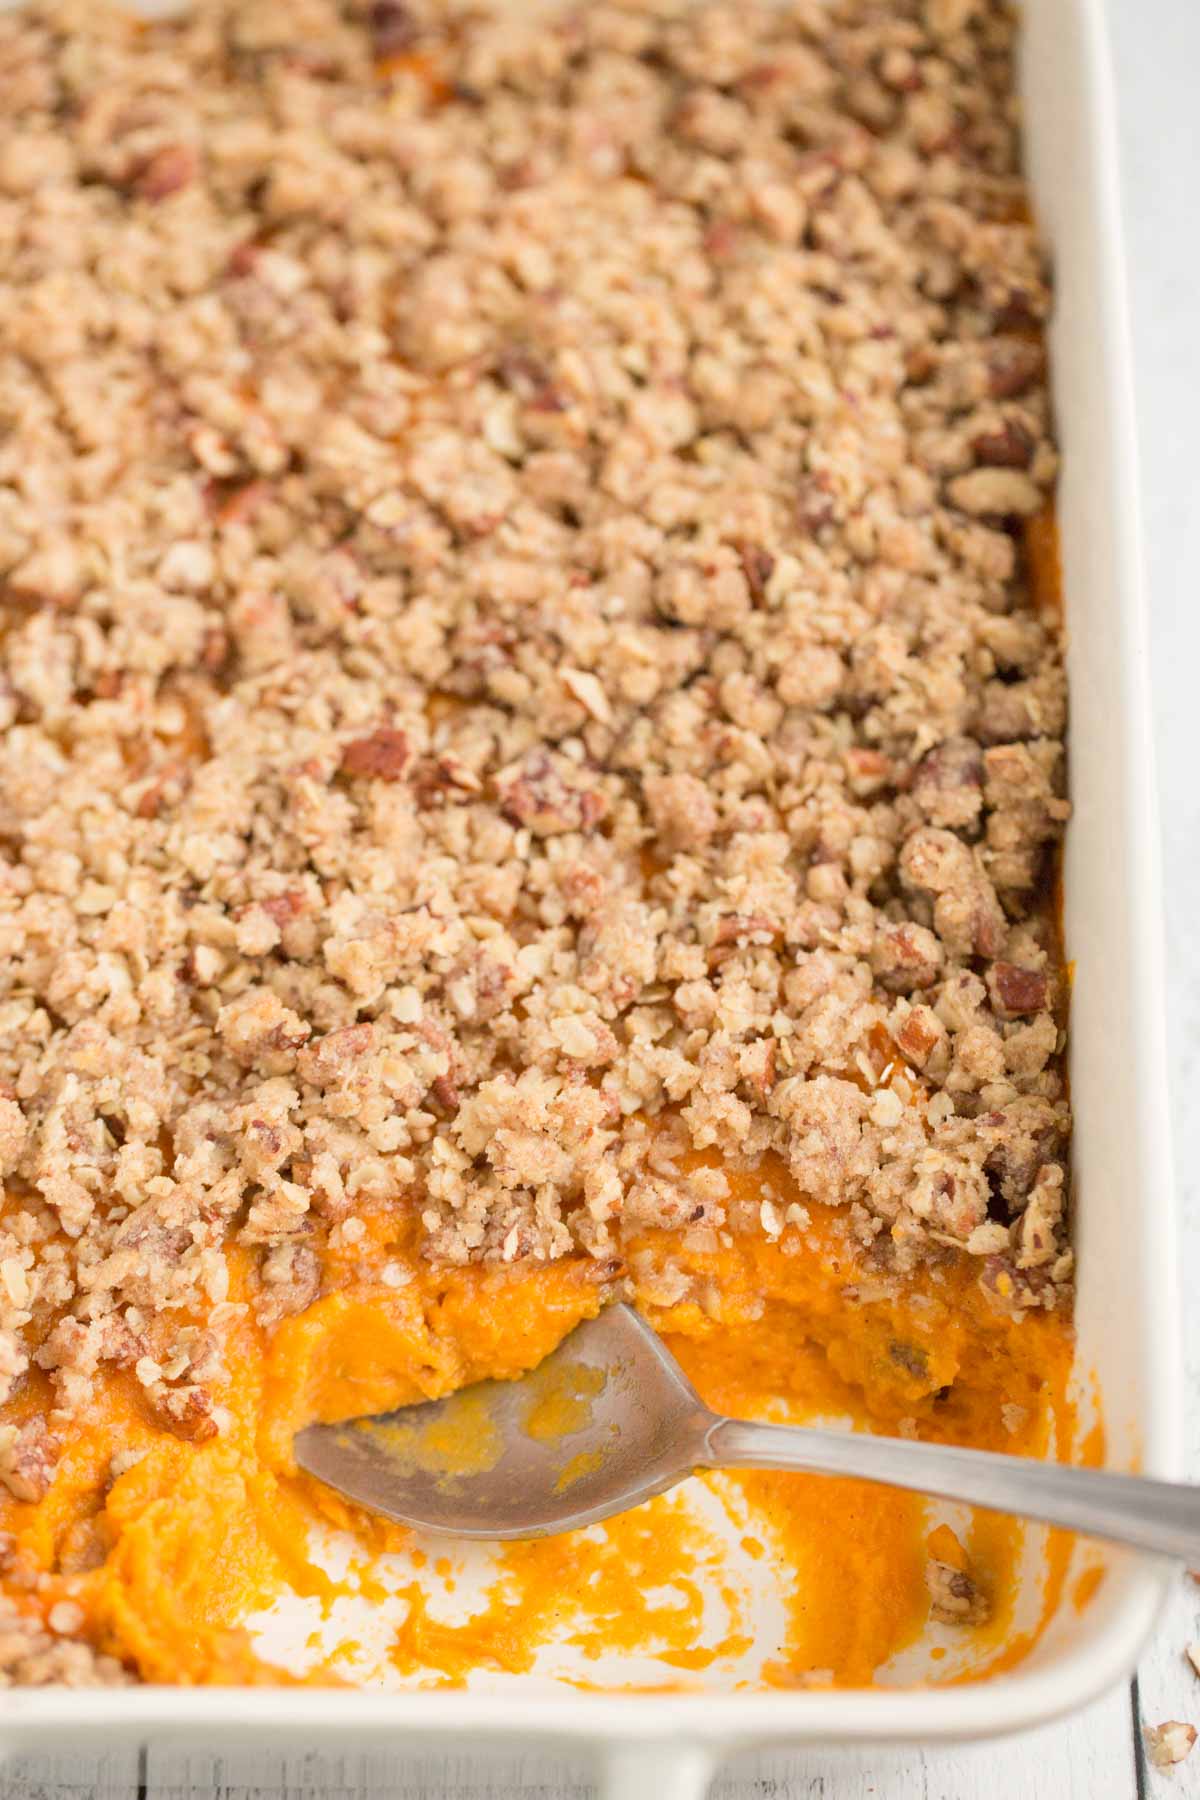 vegan sweet potato casserole with pecan crumble topping in gray and white casserole dish with metal spoon in dish